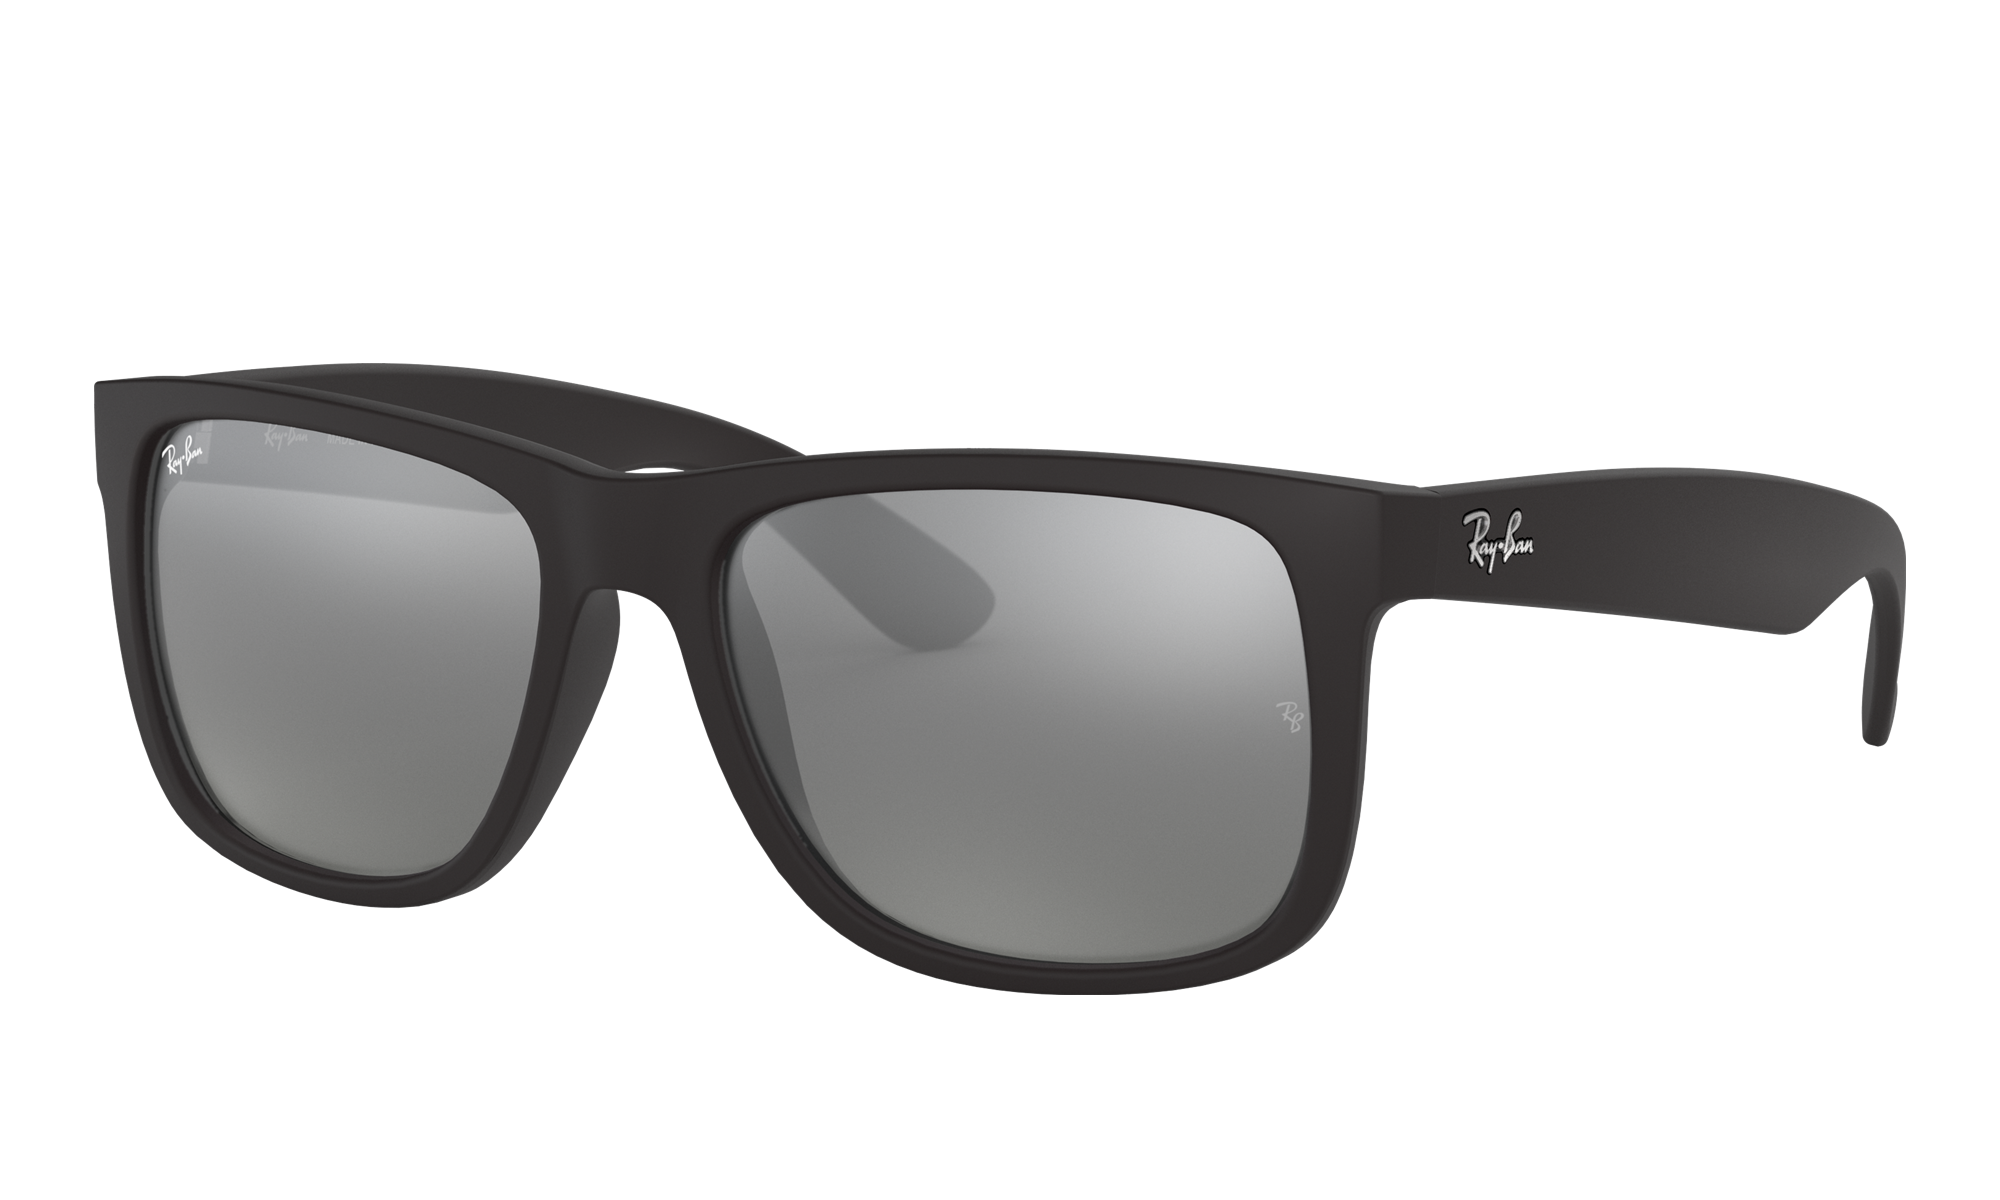 Ray-Ban Unisex Rb4165 Black Size: Small